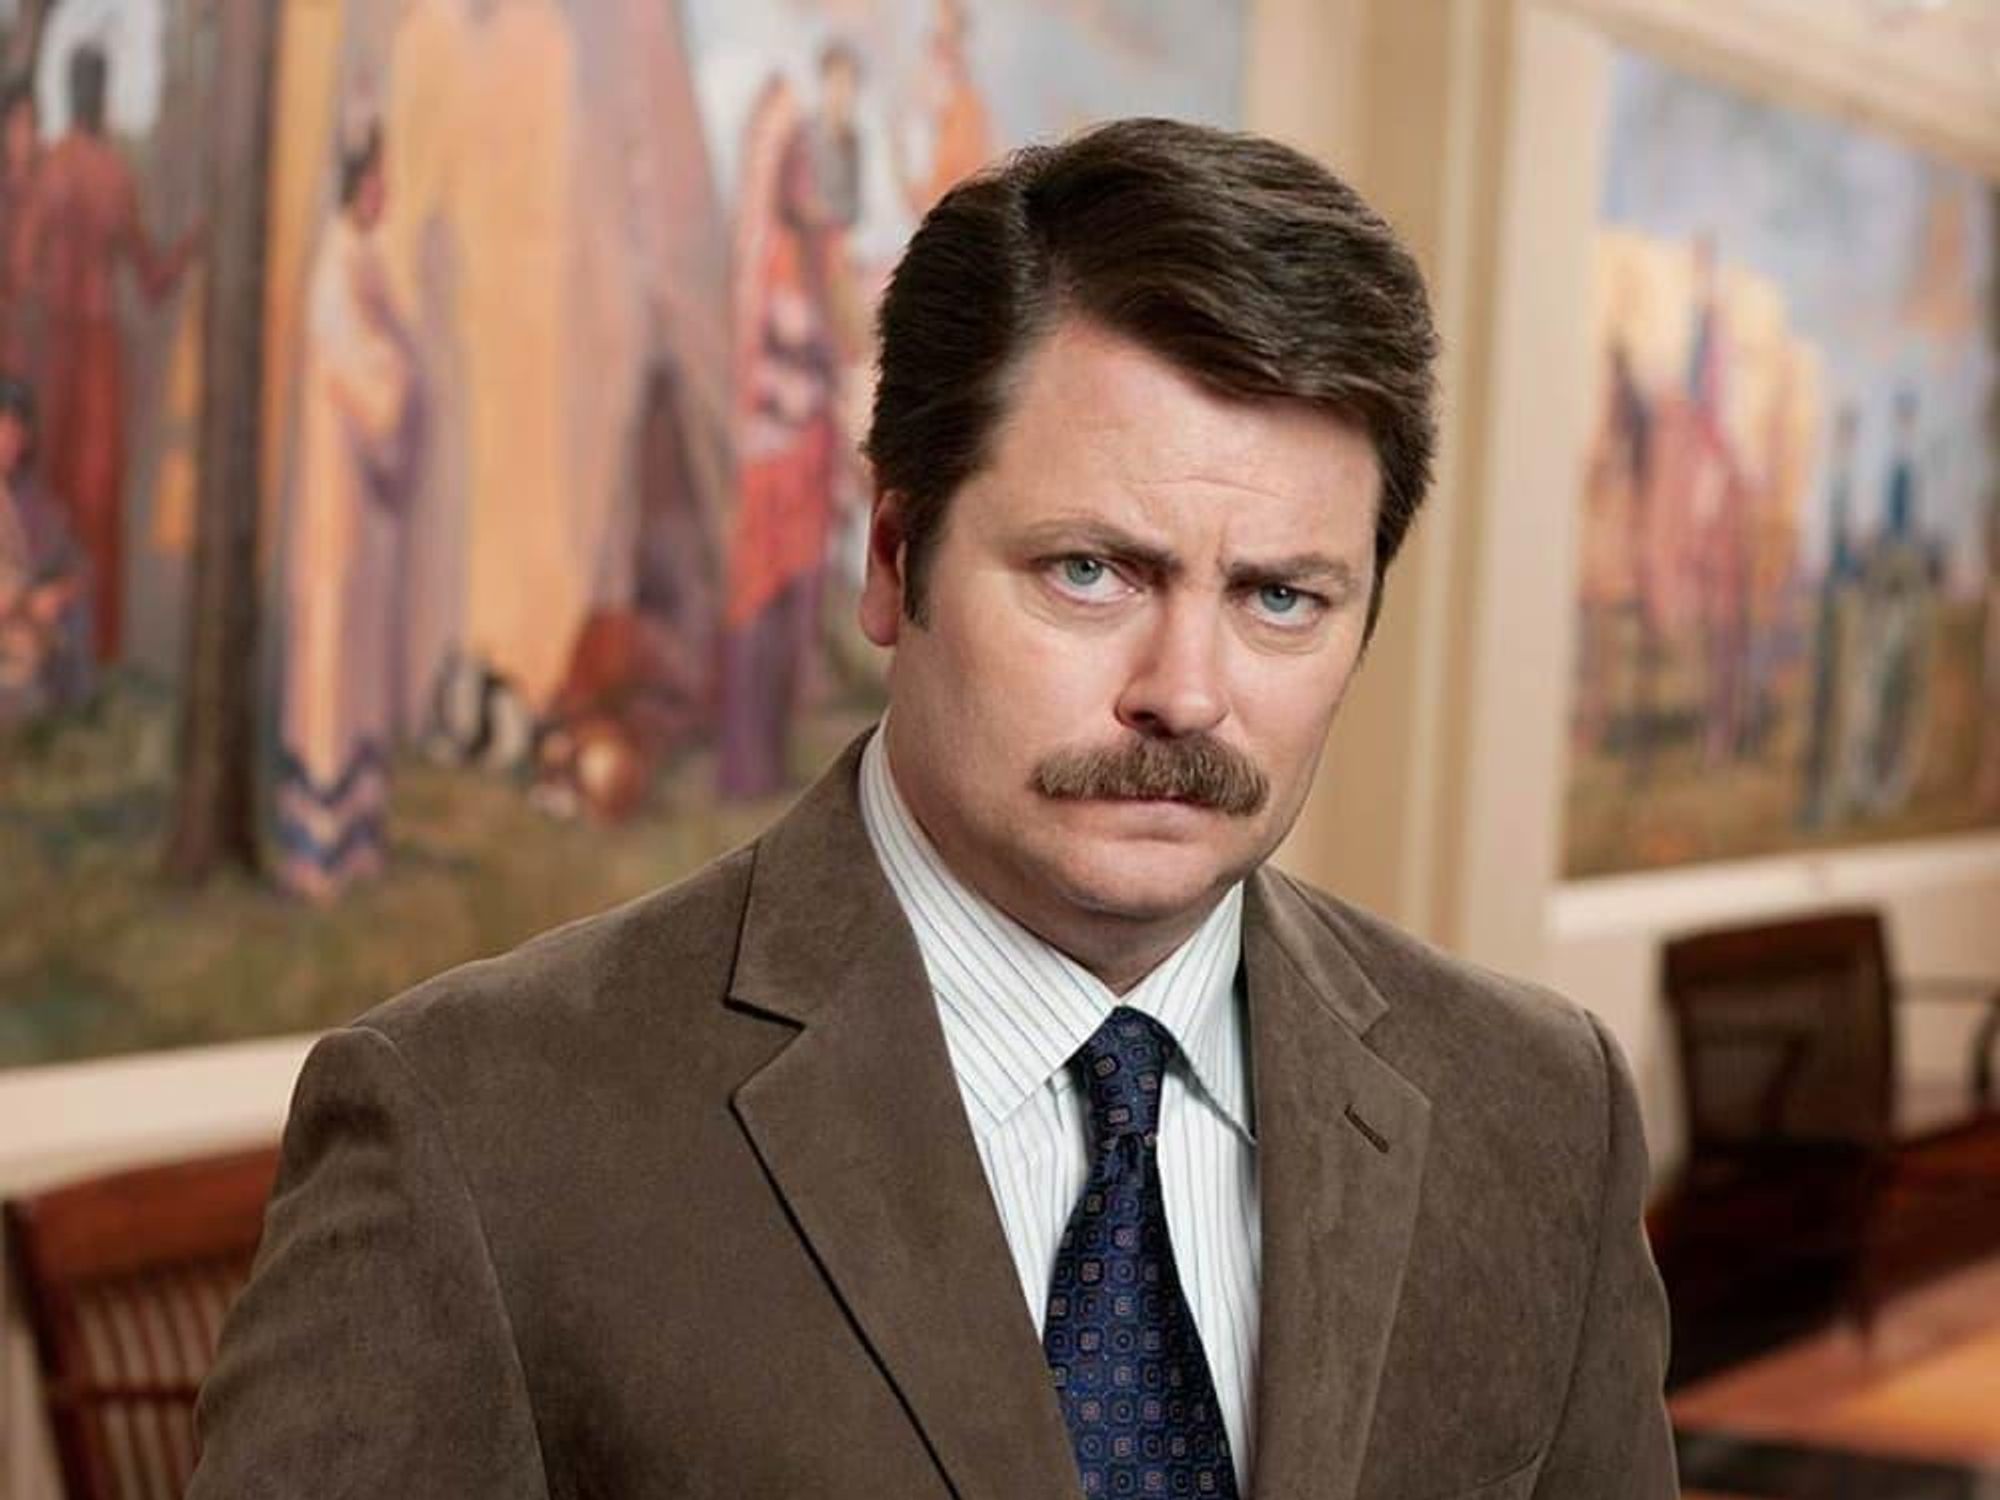 Nick Offerman as Ron Swanson of Parks and Recreation